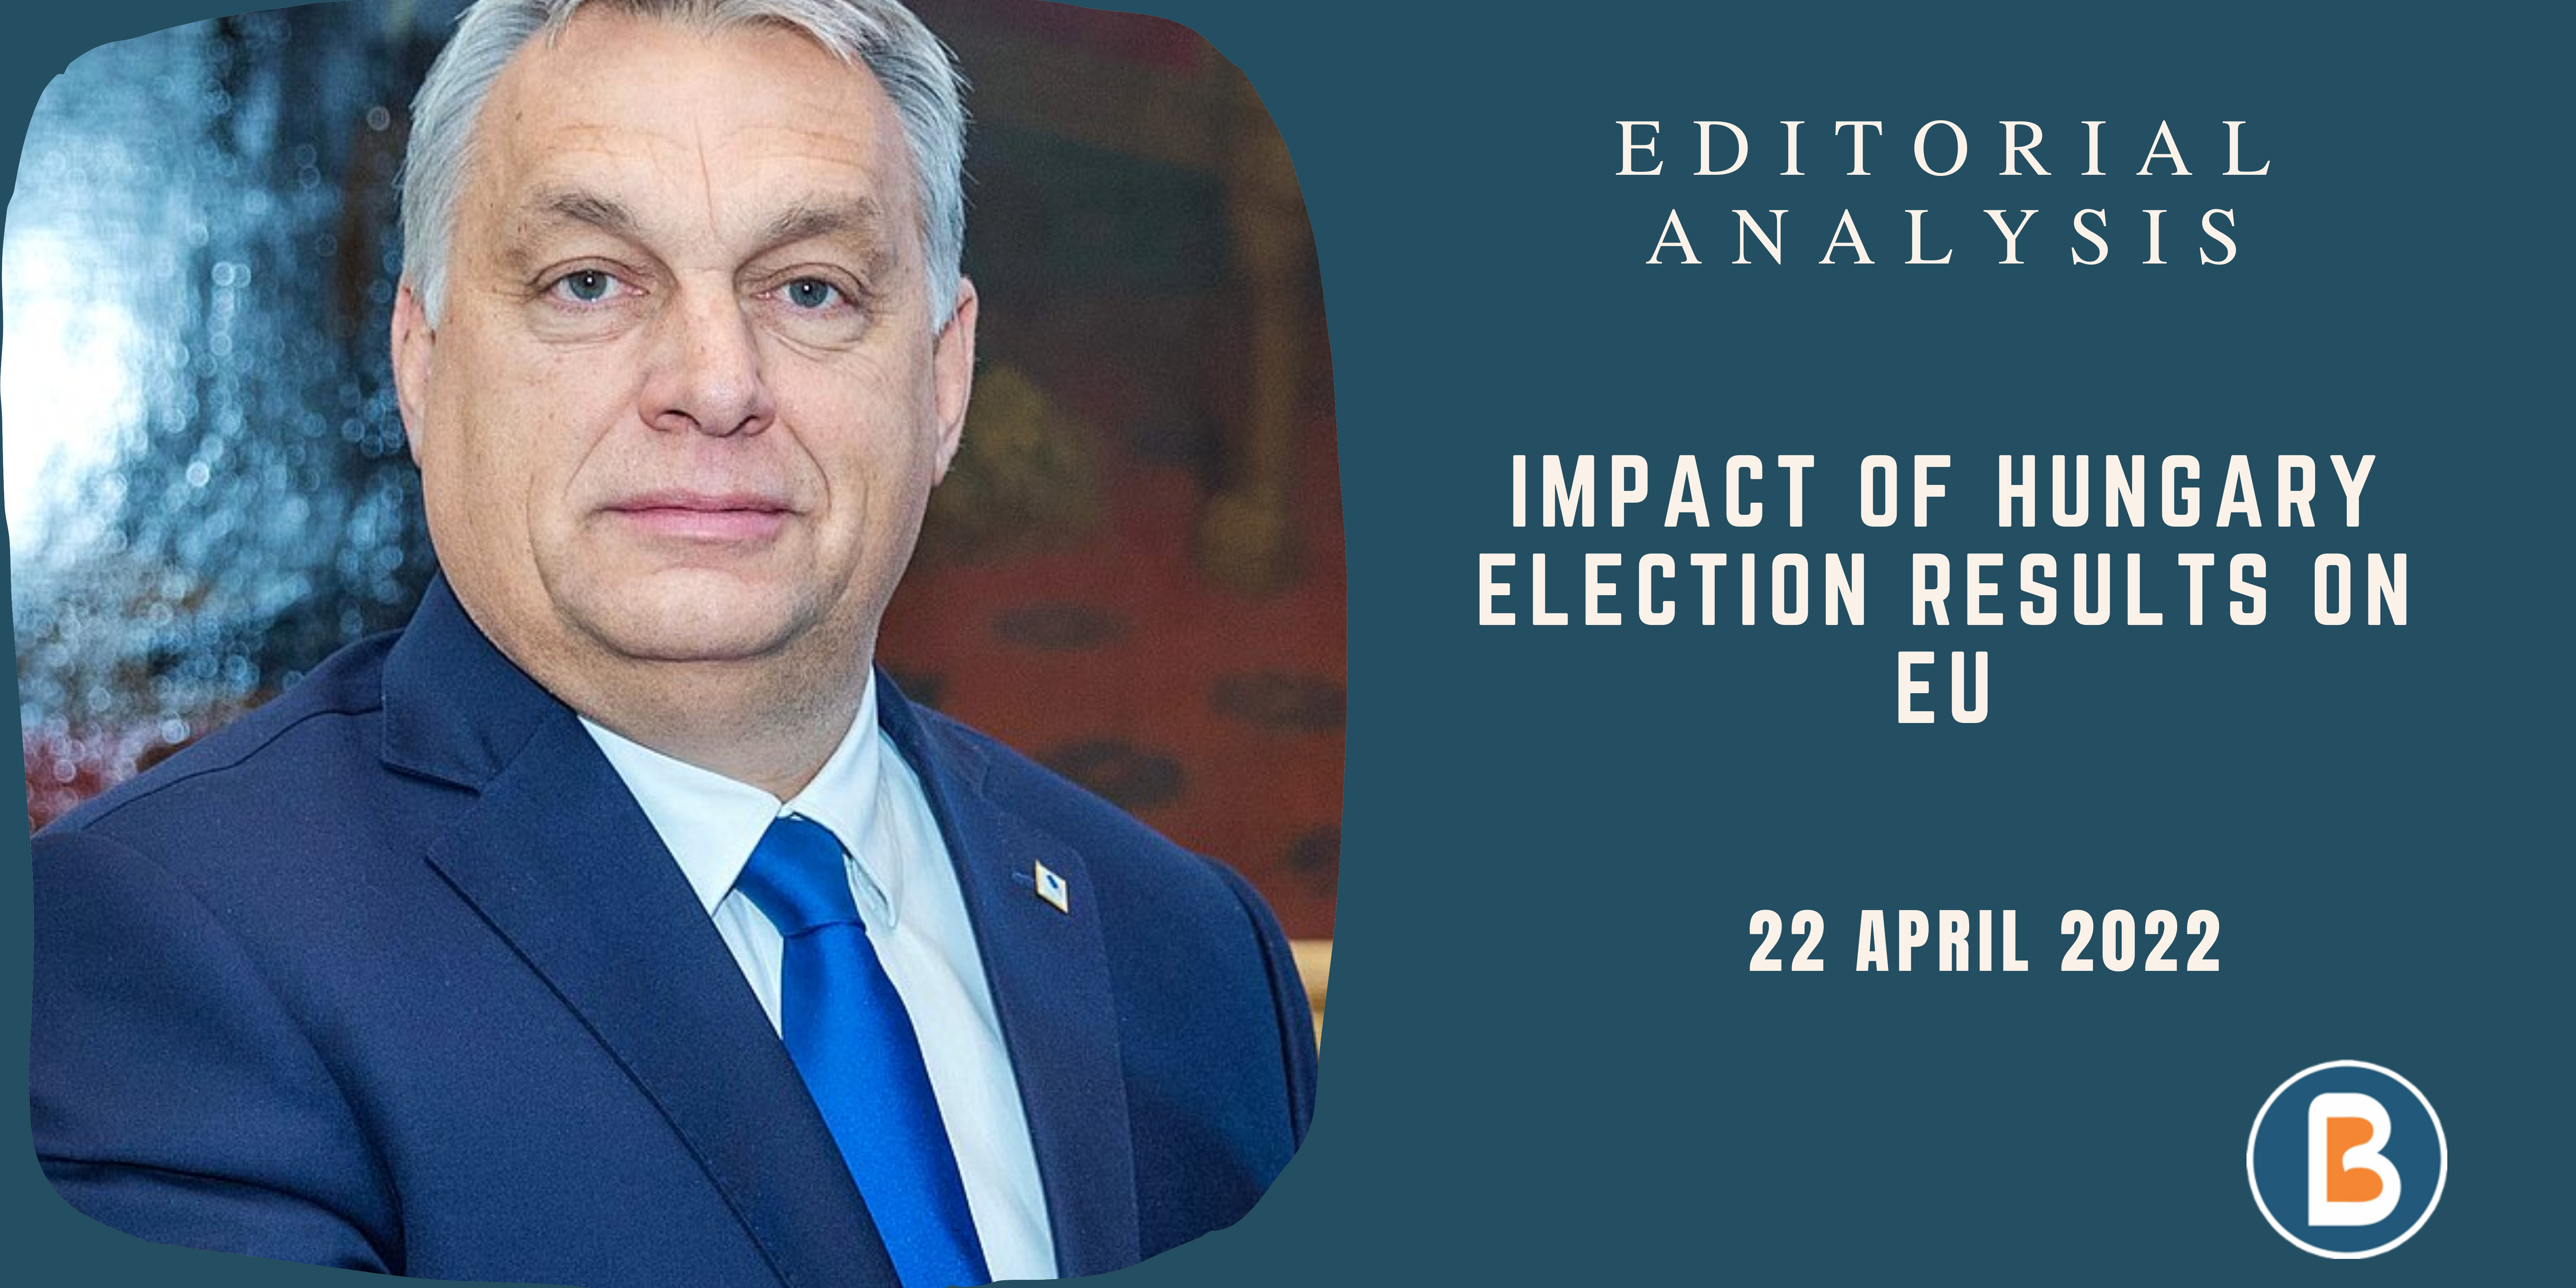 Editorial Analysis for UPSC - Impact of Hungary Election Results on EU